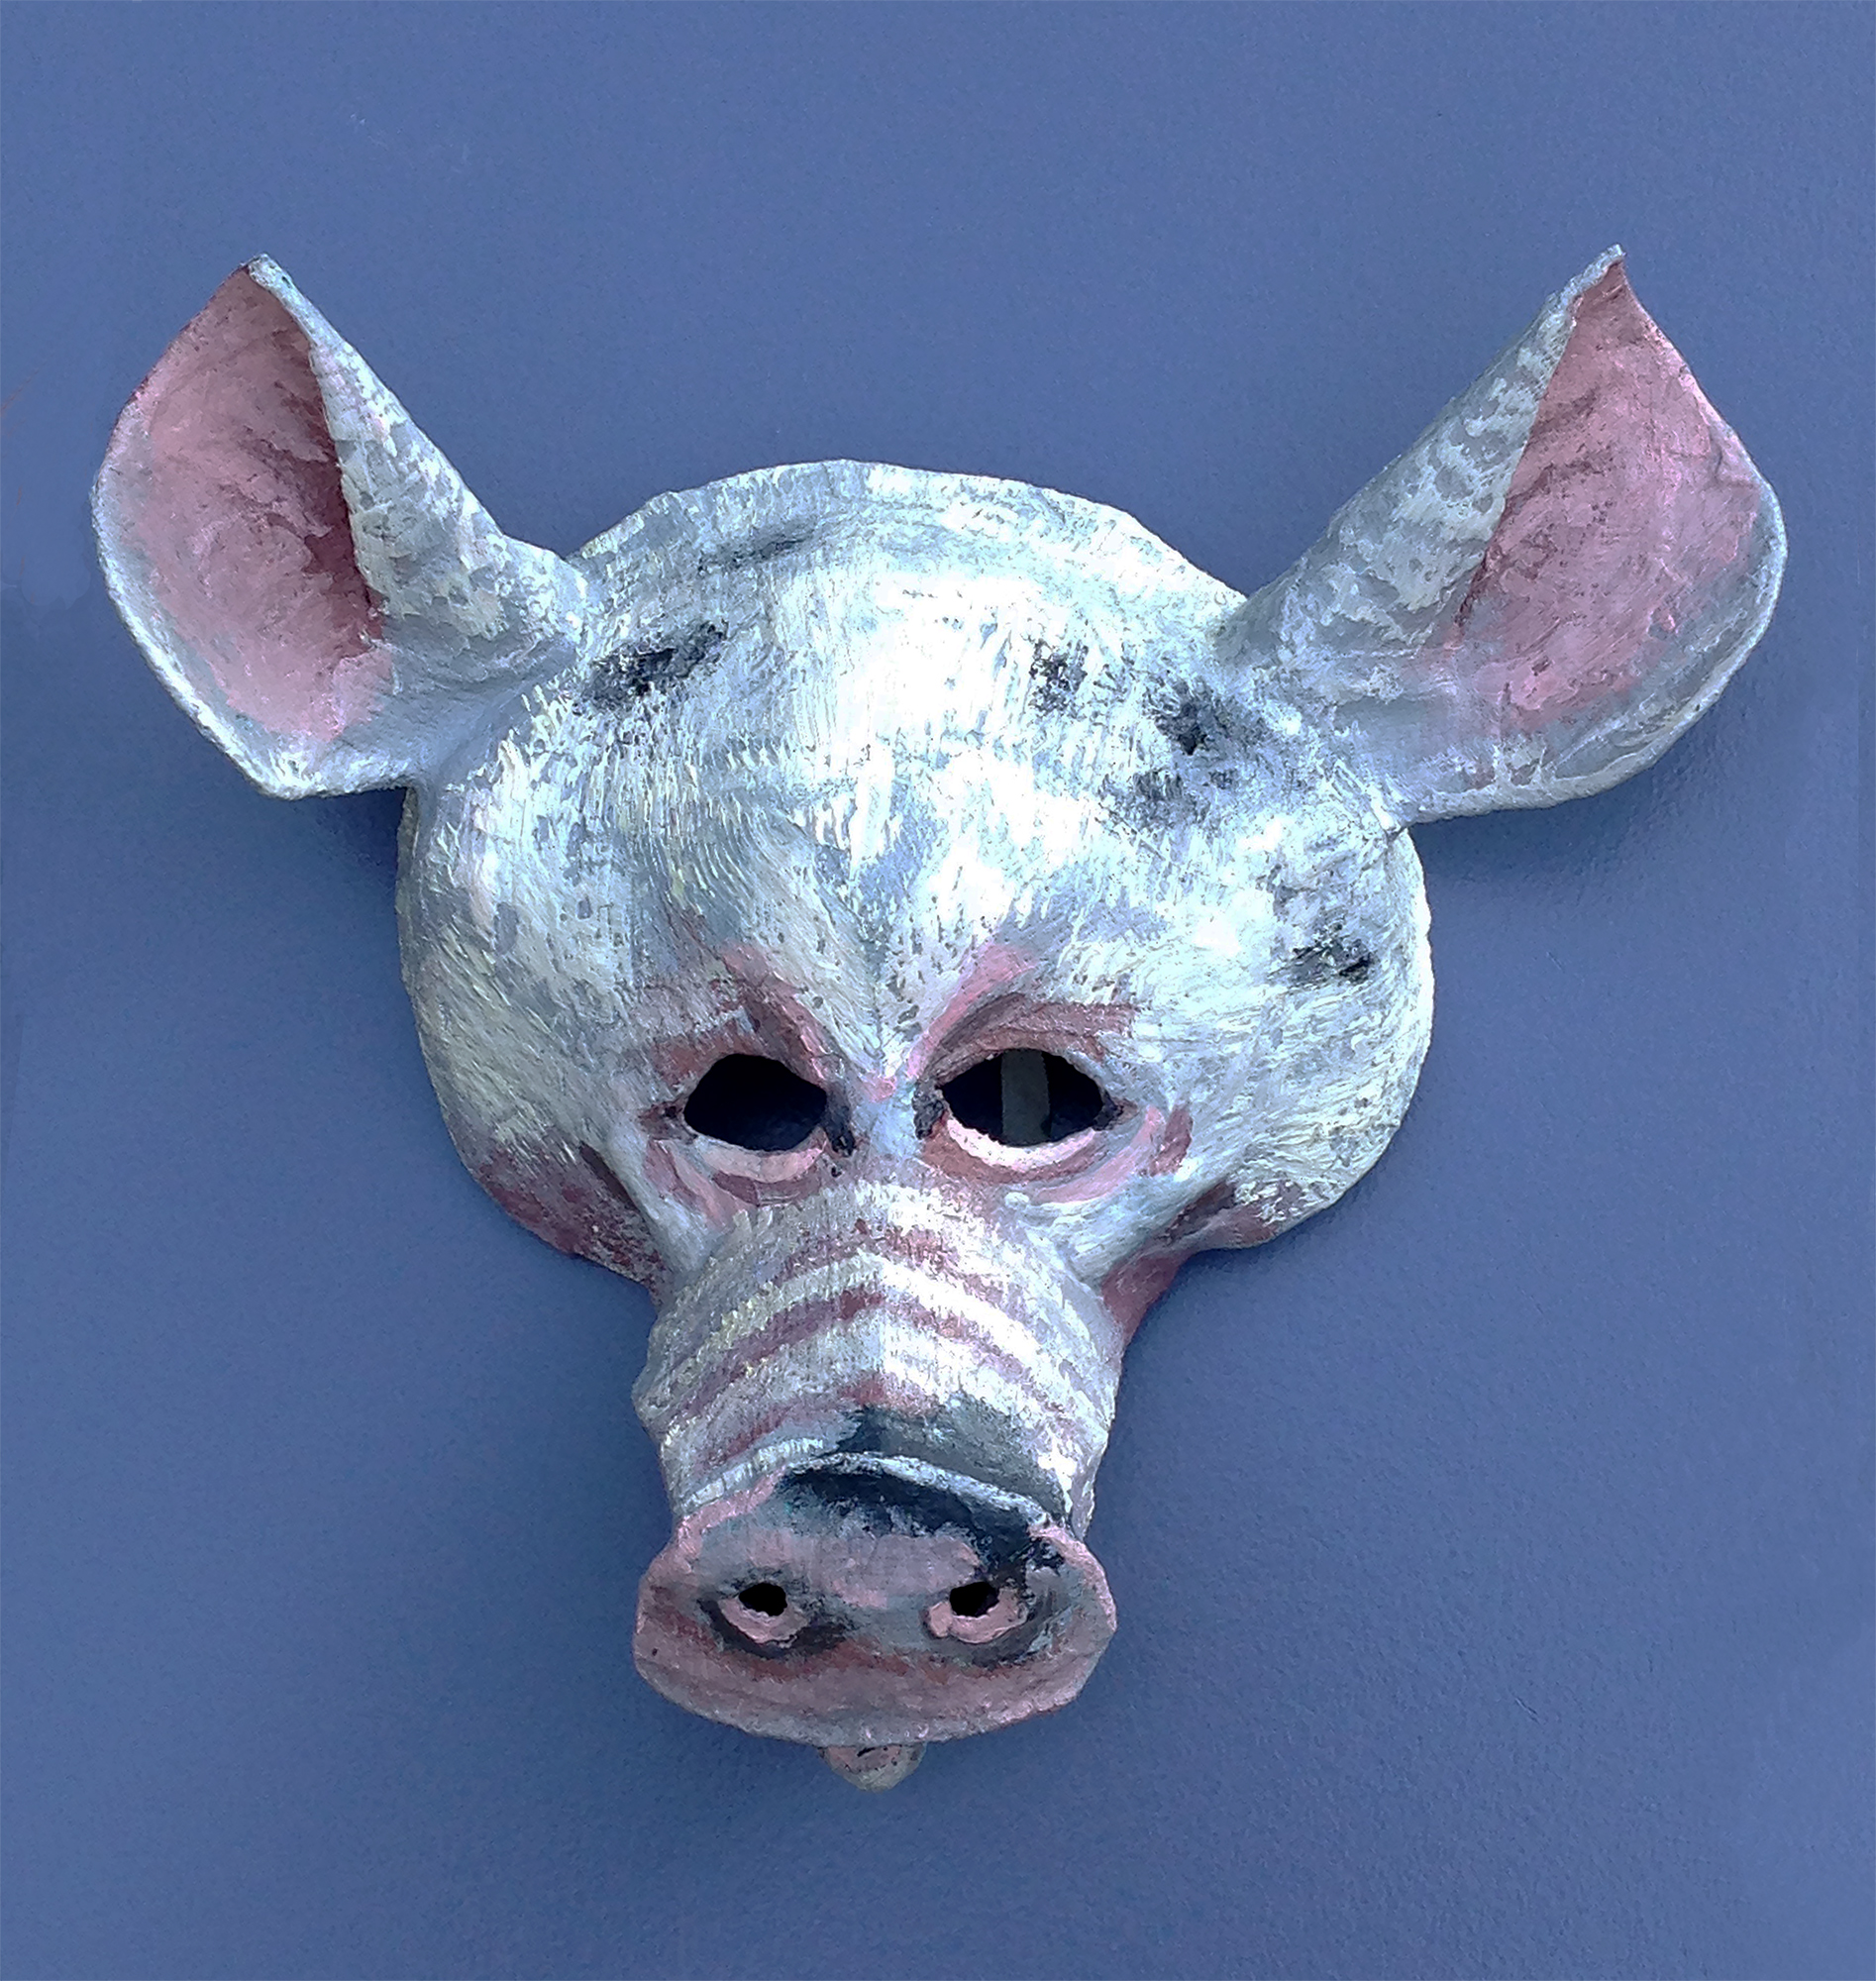    Pig Mask    (View one) , 2016. Oil on paper mache and plaster gauze 